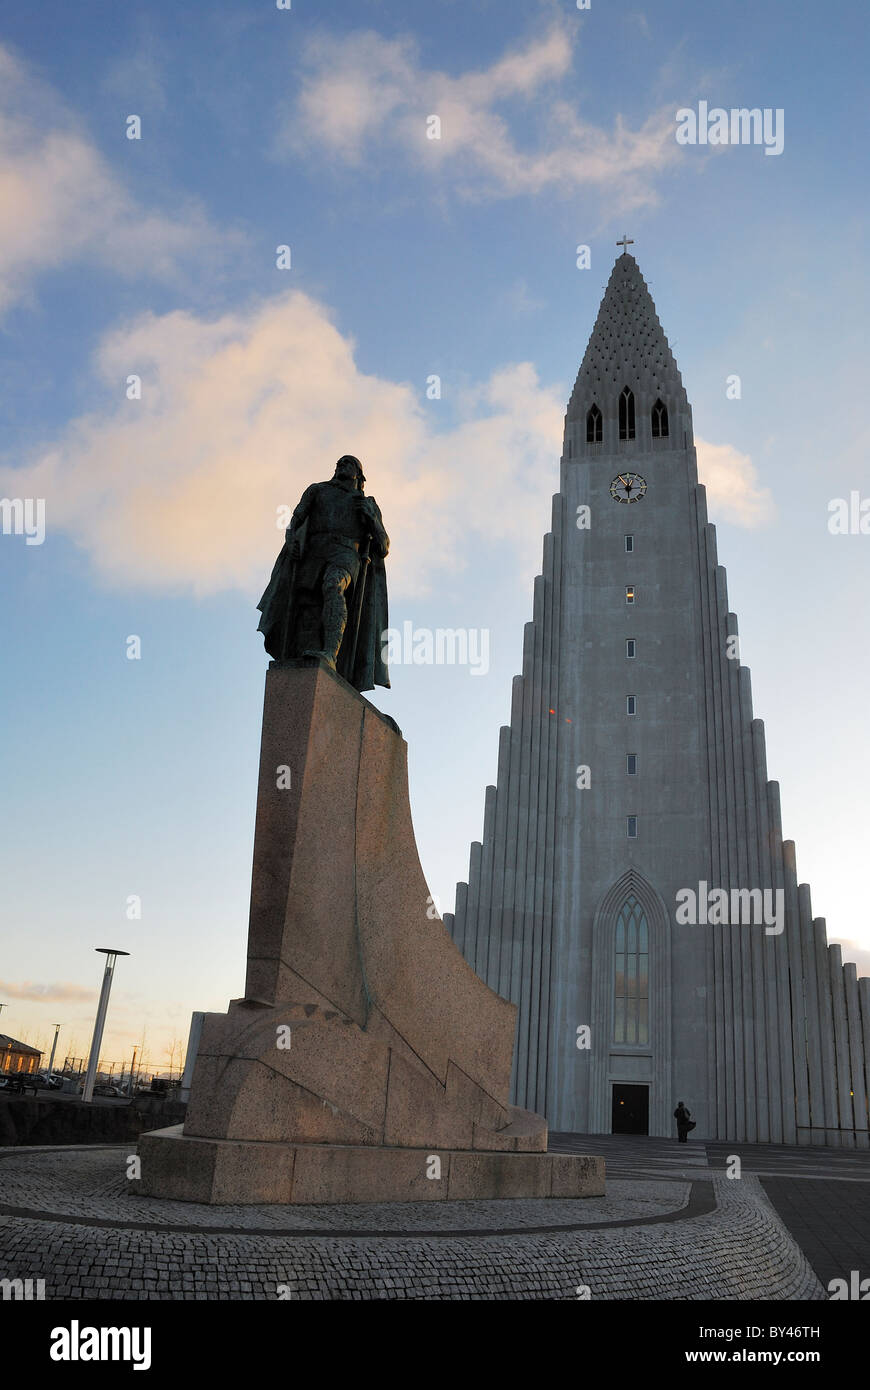 Leif Eriksson statue and the Hallgrimskirkja cathedral in Reykjavik, Iceland Stock Photo